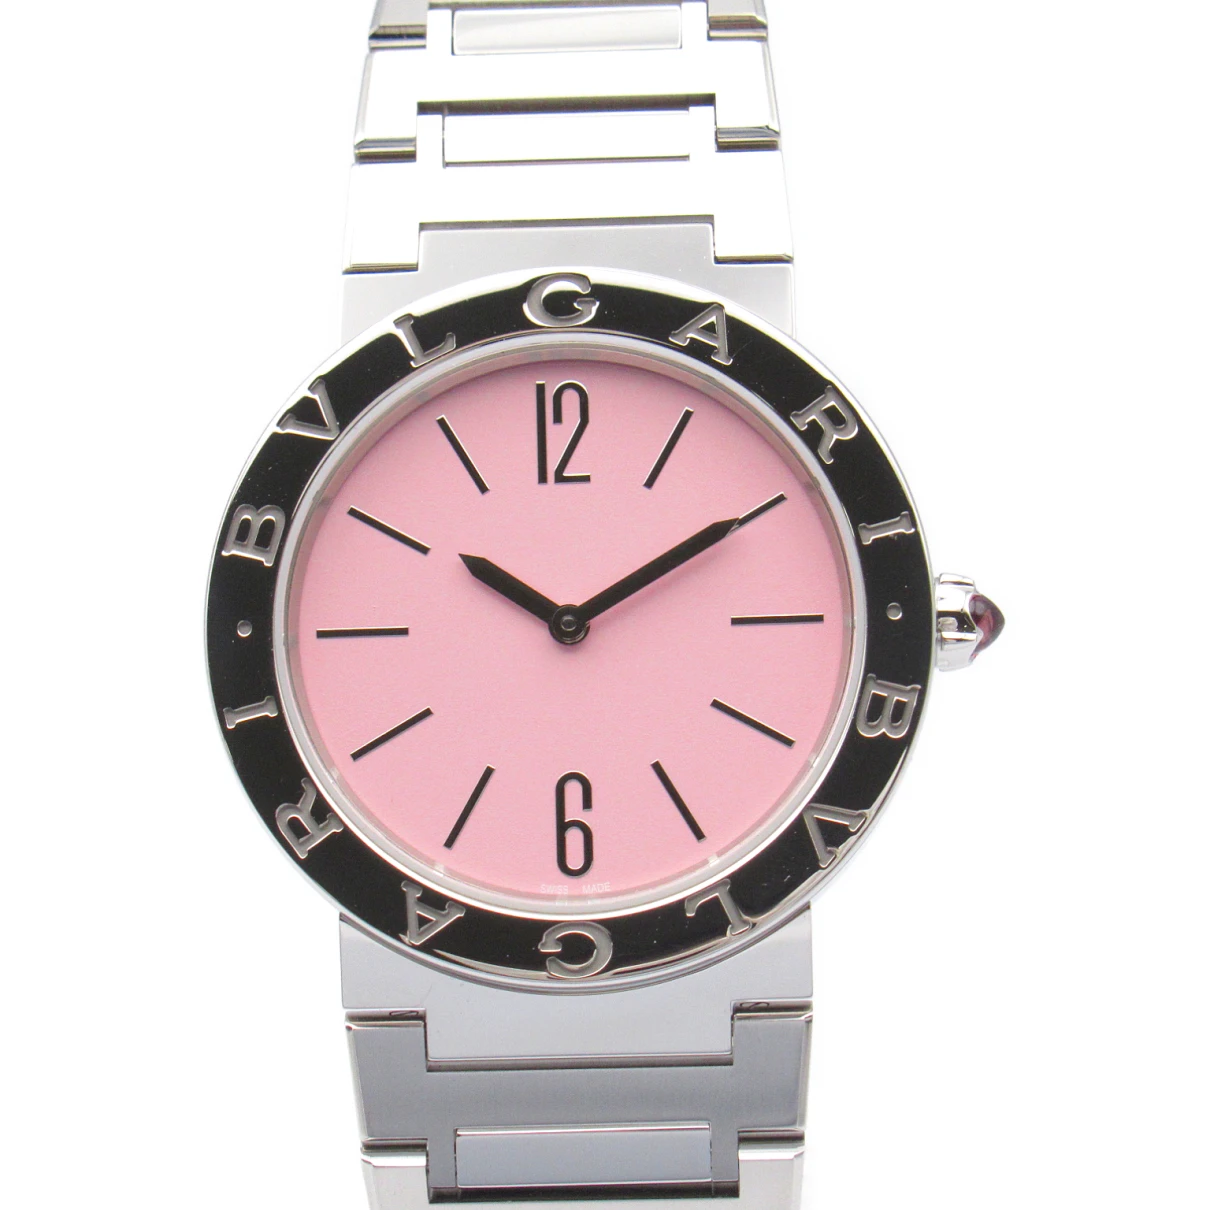 Pre-owned Bvlgari Watch In Pink